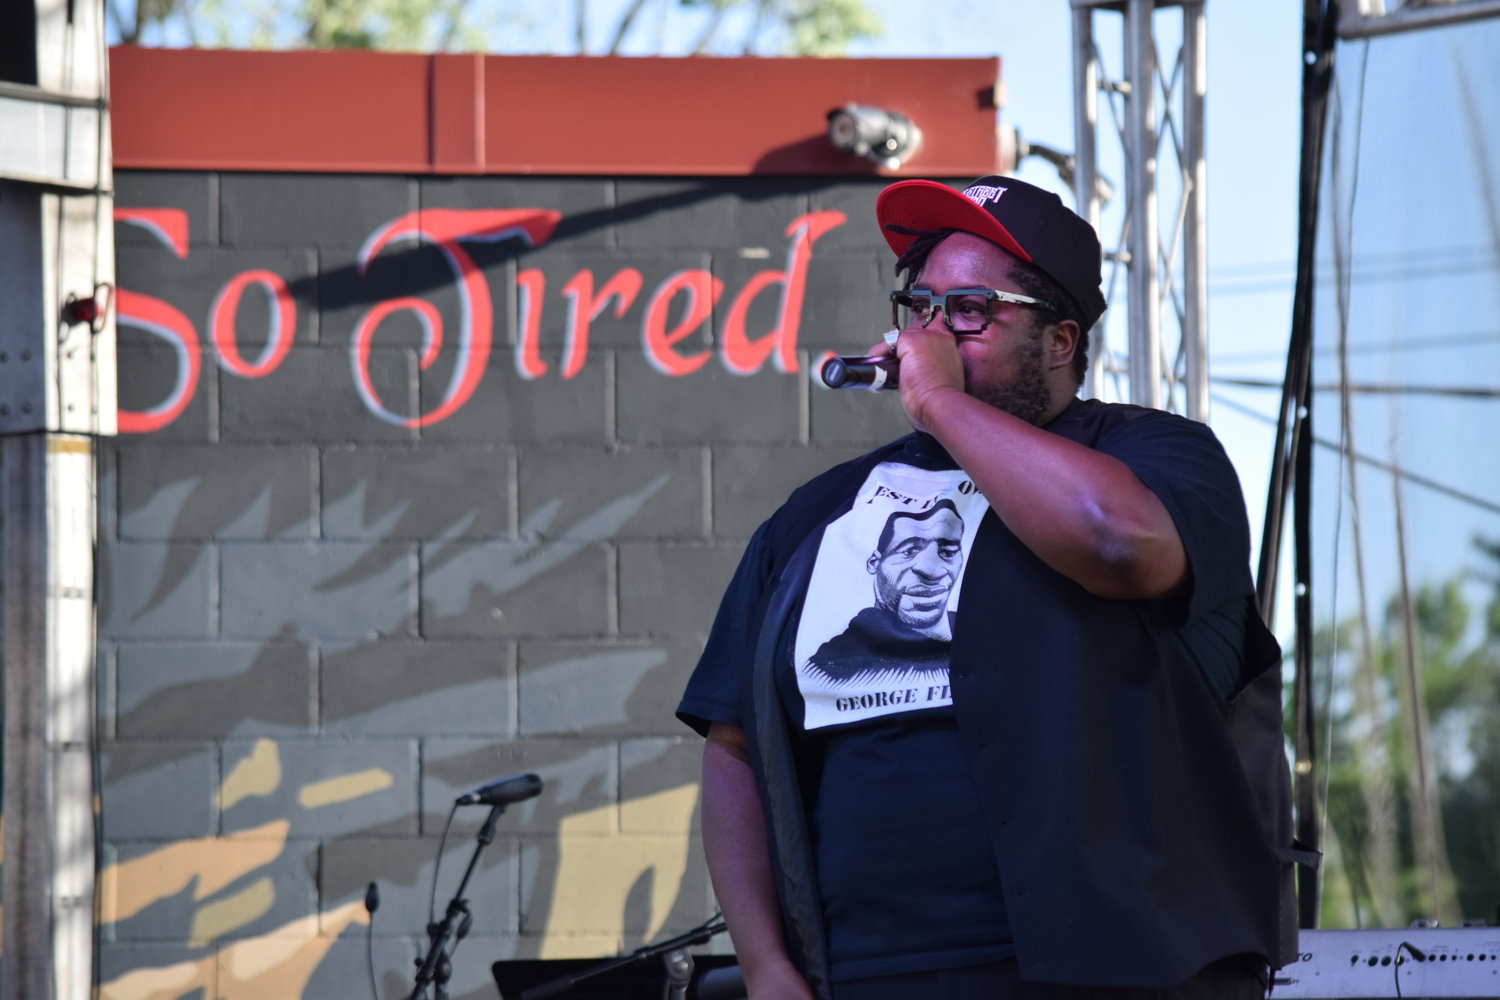 Local hip hop artist Nur-D performed “8:46” from his album “38th.”